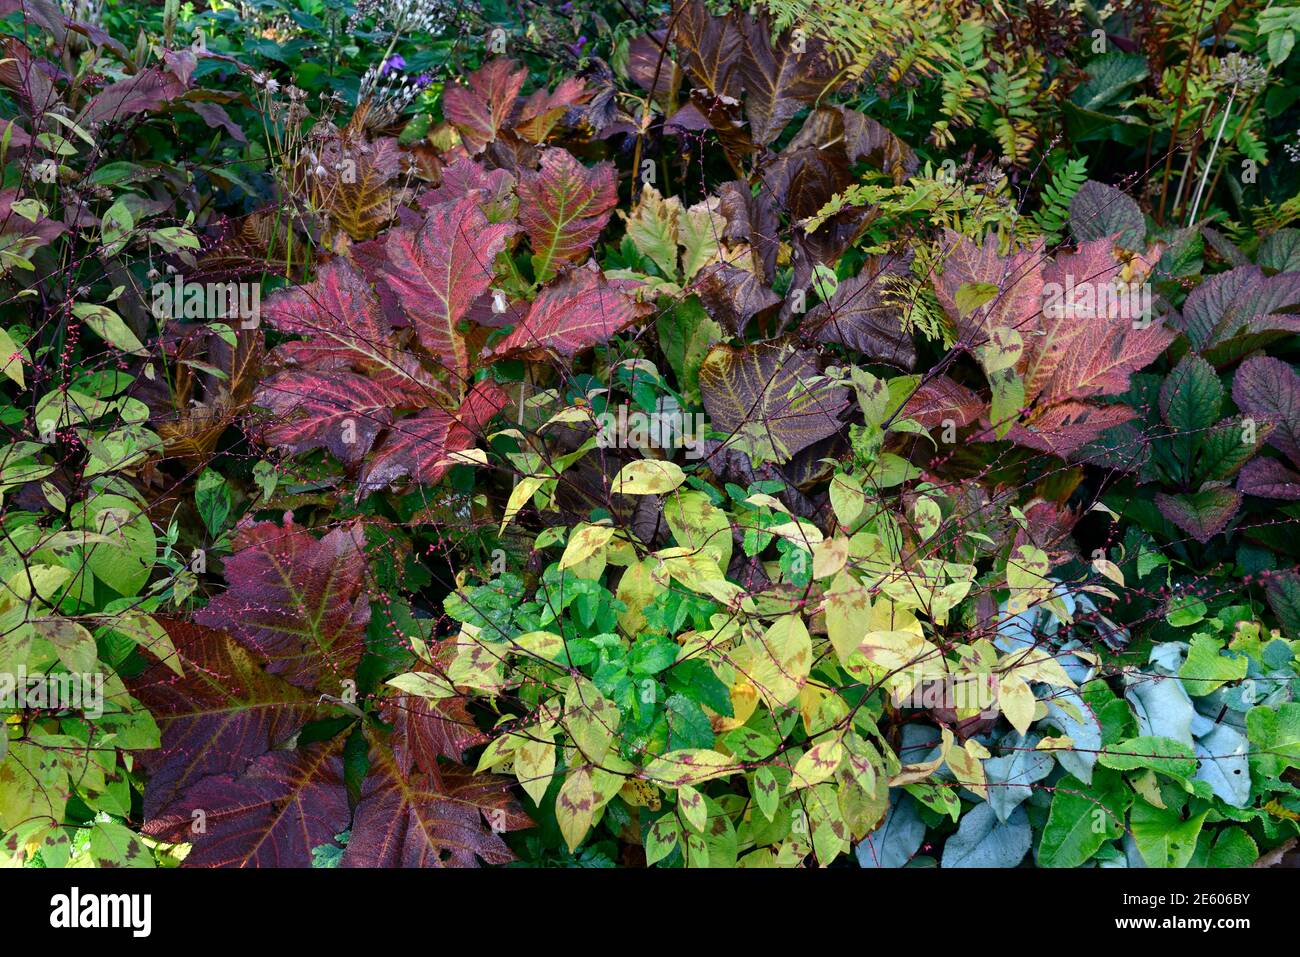 autumn in the garden,perennial plants foliage,leaves,pulmonaria,rodgersia,persicaria,changing colours,fall,colors,RM Floral Stock Photo